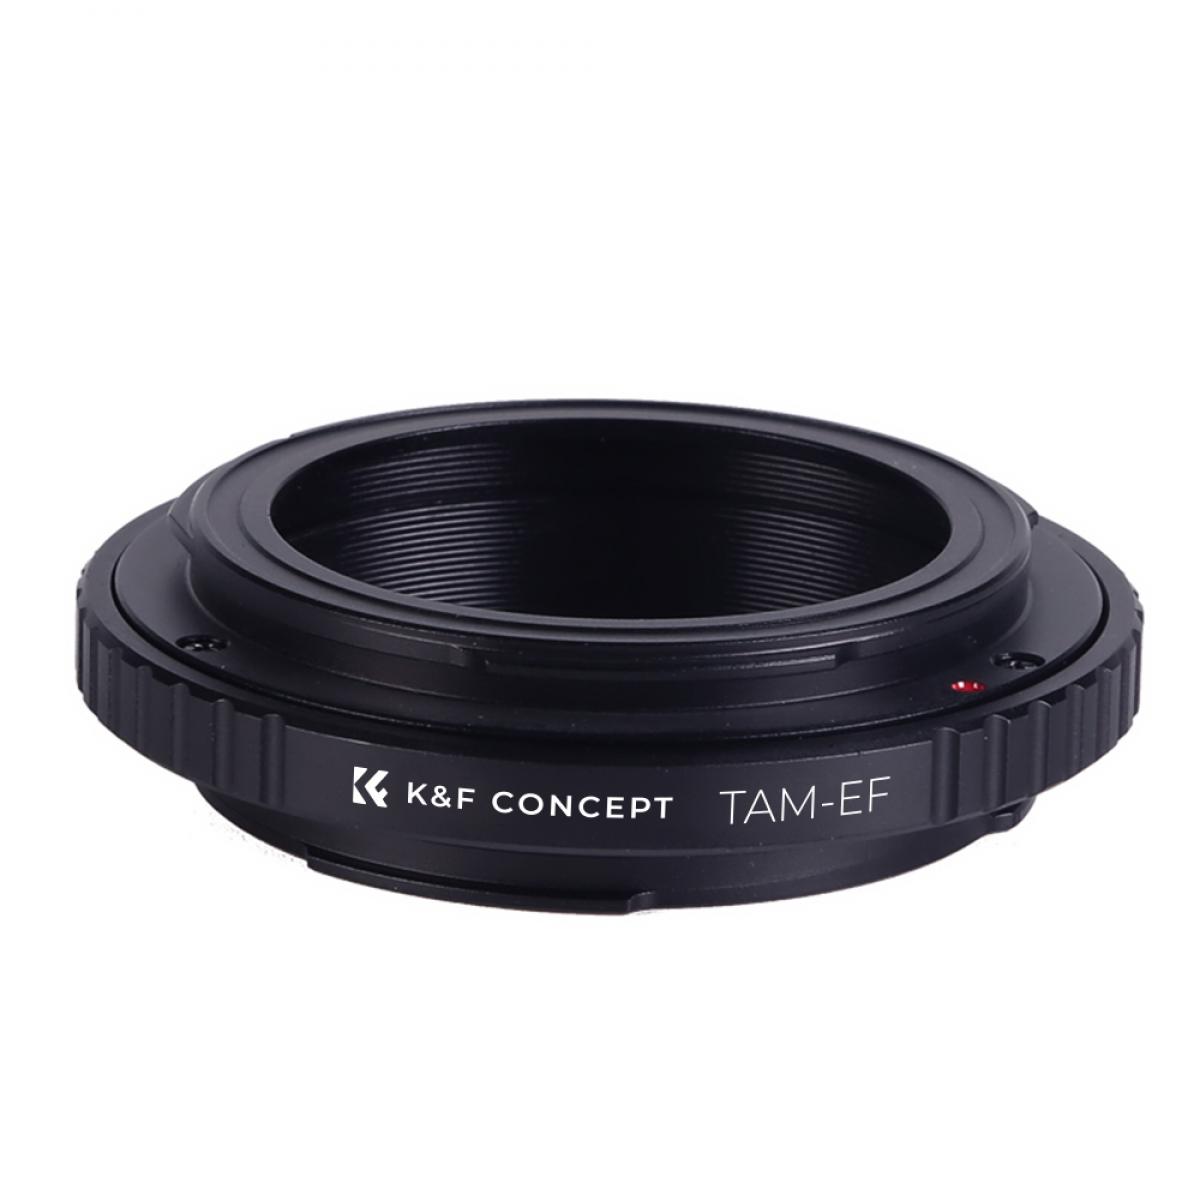 Tamron Adaptall 2 Lenses to Canon EF Lens Mount Adapter K&F Concept M23131 Lens Adapter